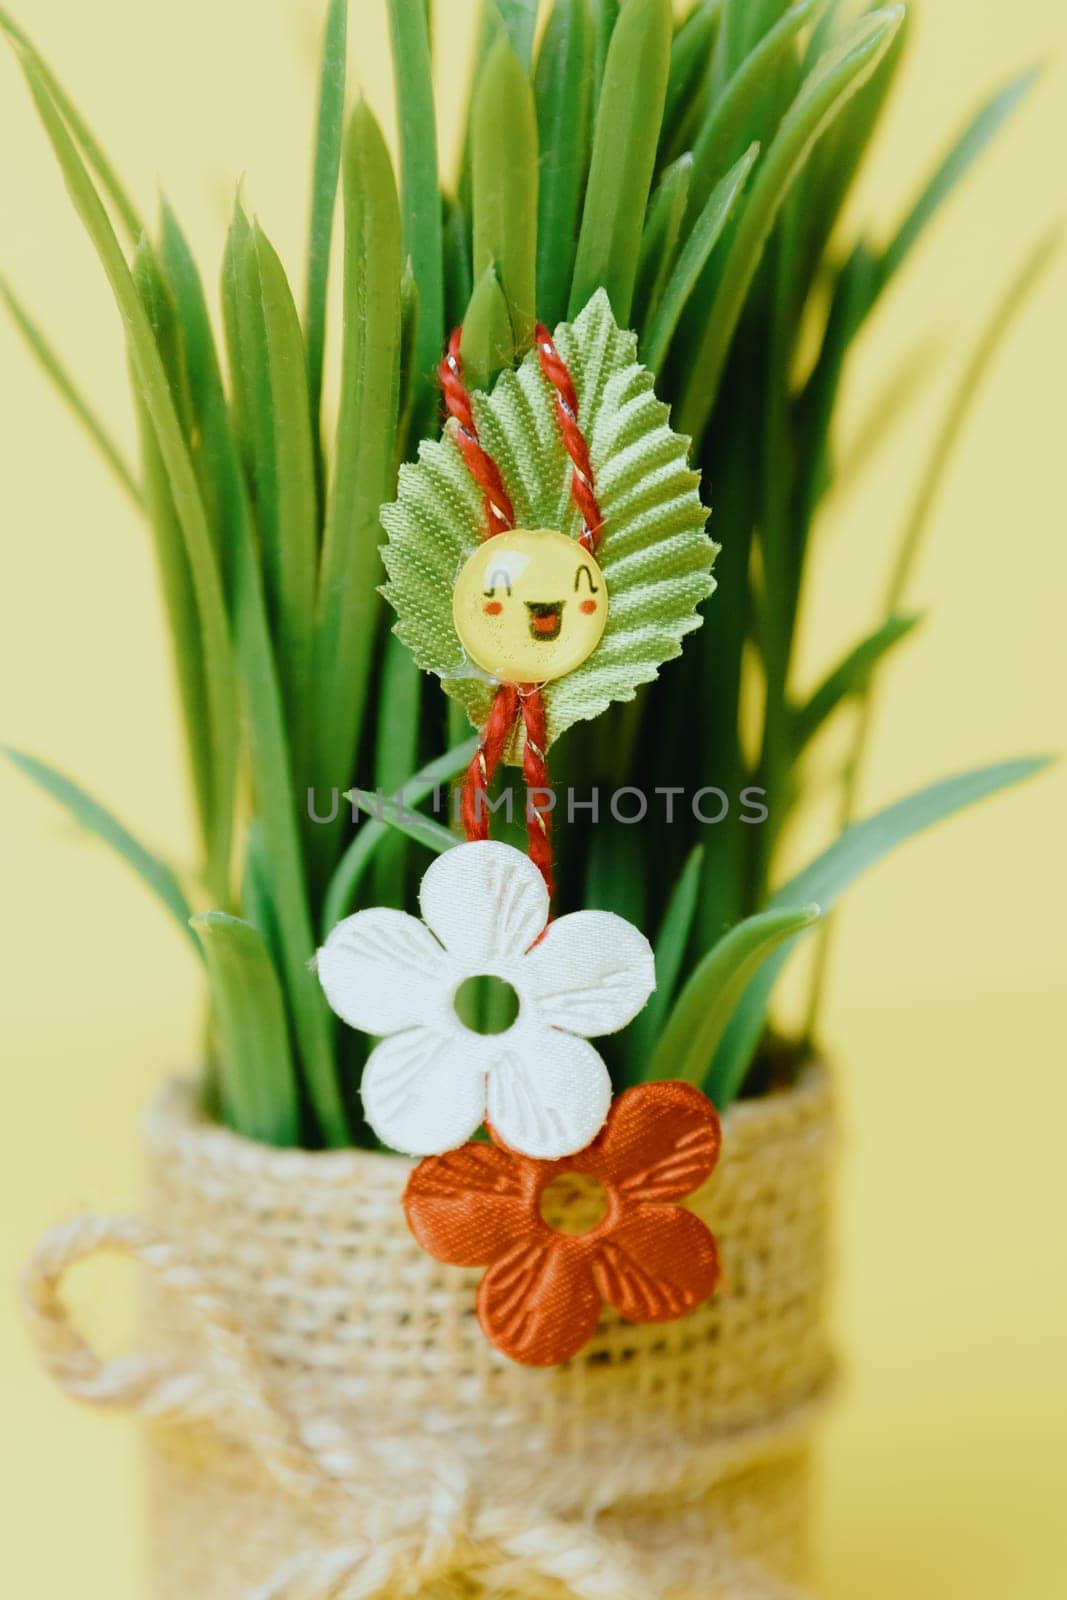 One beautiful homemade martisor of two flowers, a petal and a cheerful smiley face hangs on sprouted wheat in a jute pot on a pastel yellow background, close-up side view with depth of field.